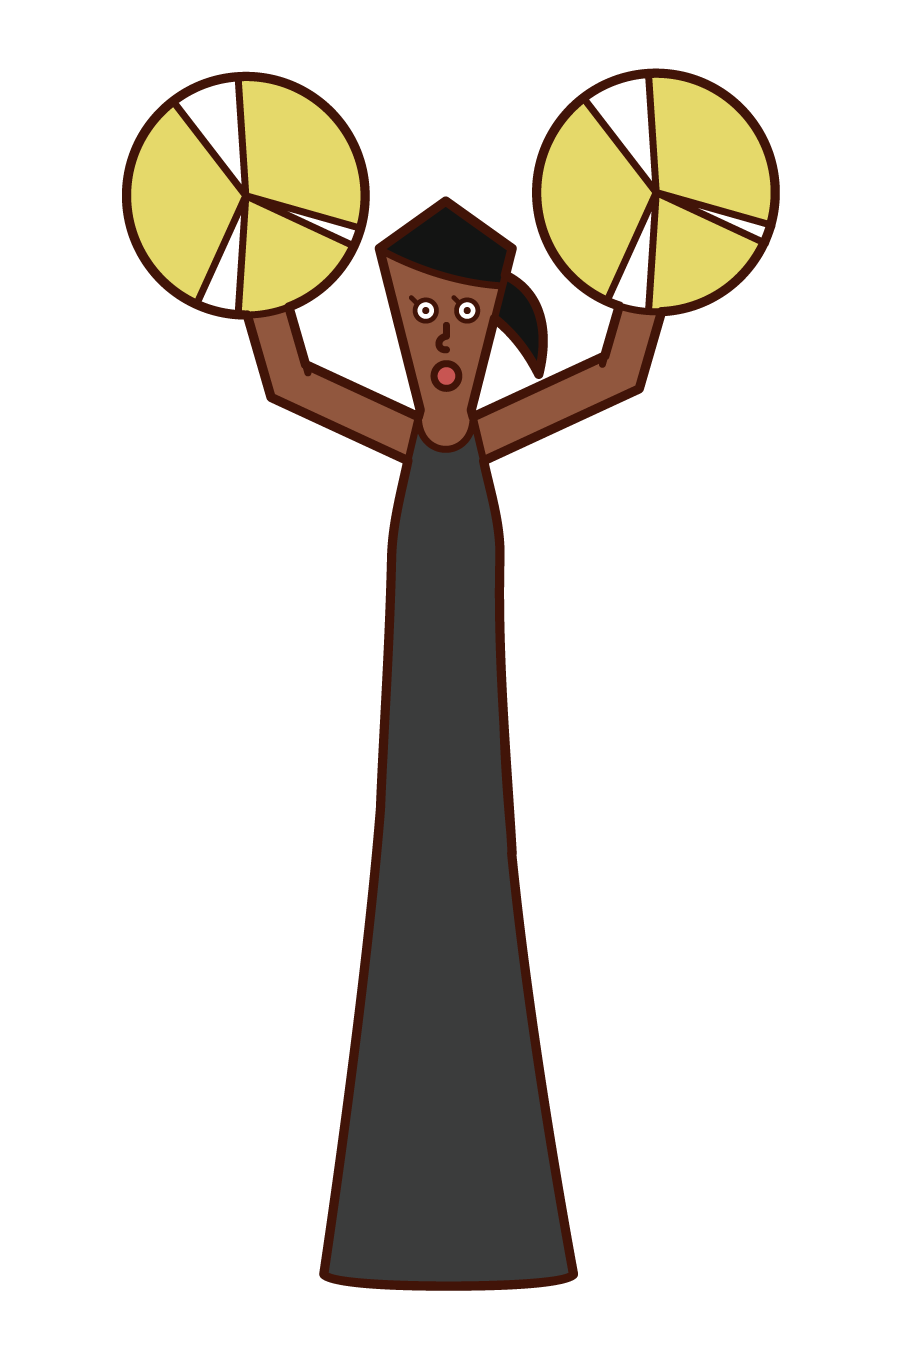 Illustration of a woman playing a cymbal